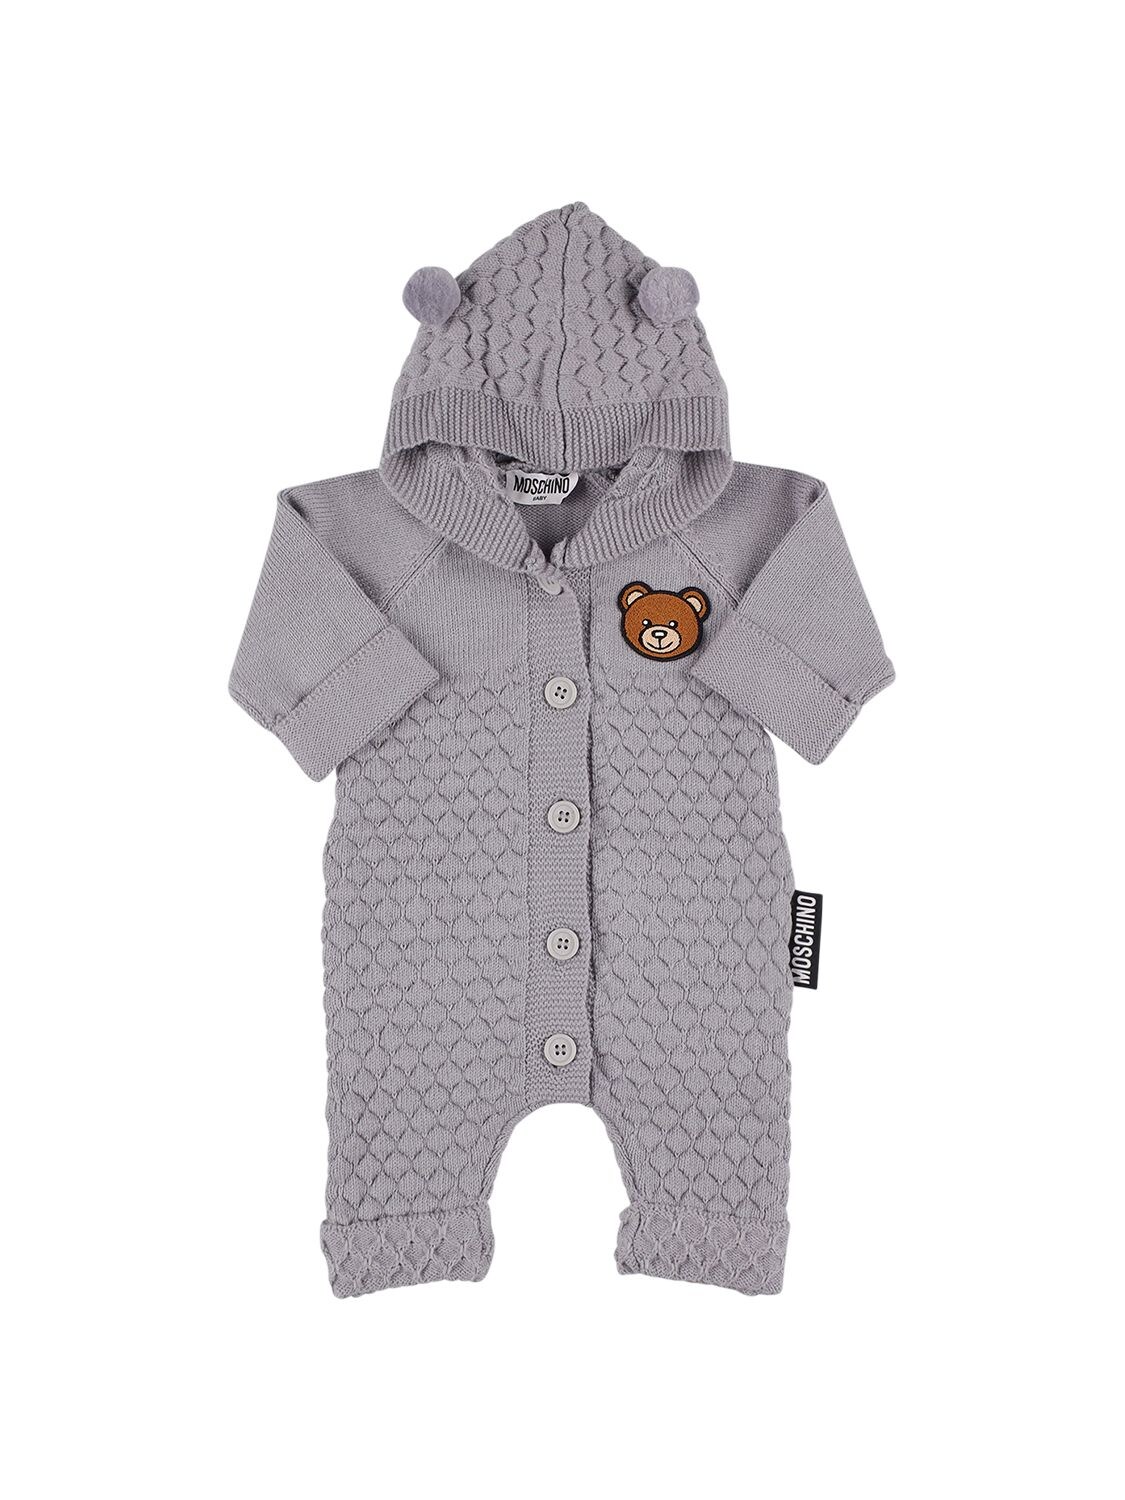 Moschino Babies' Cotton & Wool Blend Knit Romper W/ Patch In Grey